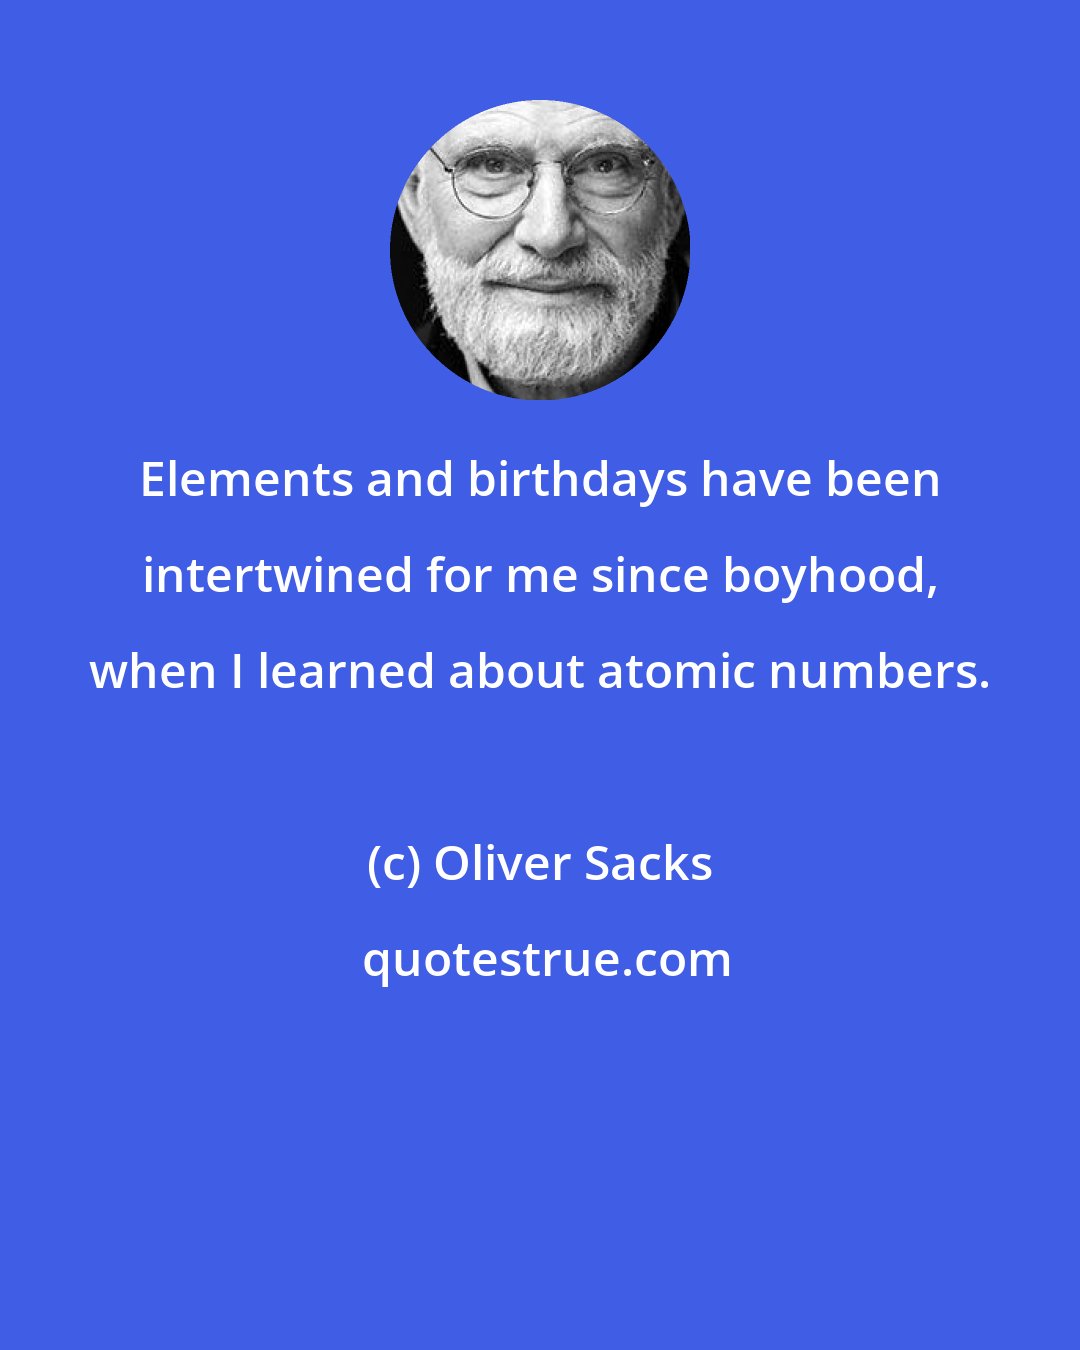 Oliver Sacks: Elements and birthdays have been intertwined for me since boyhood, when I learned about atomic numbers.